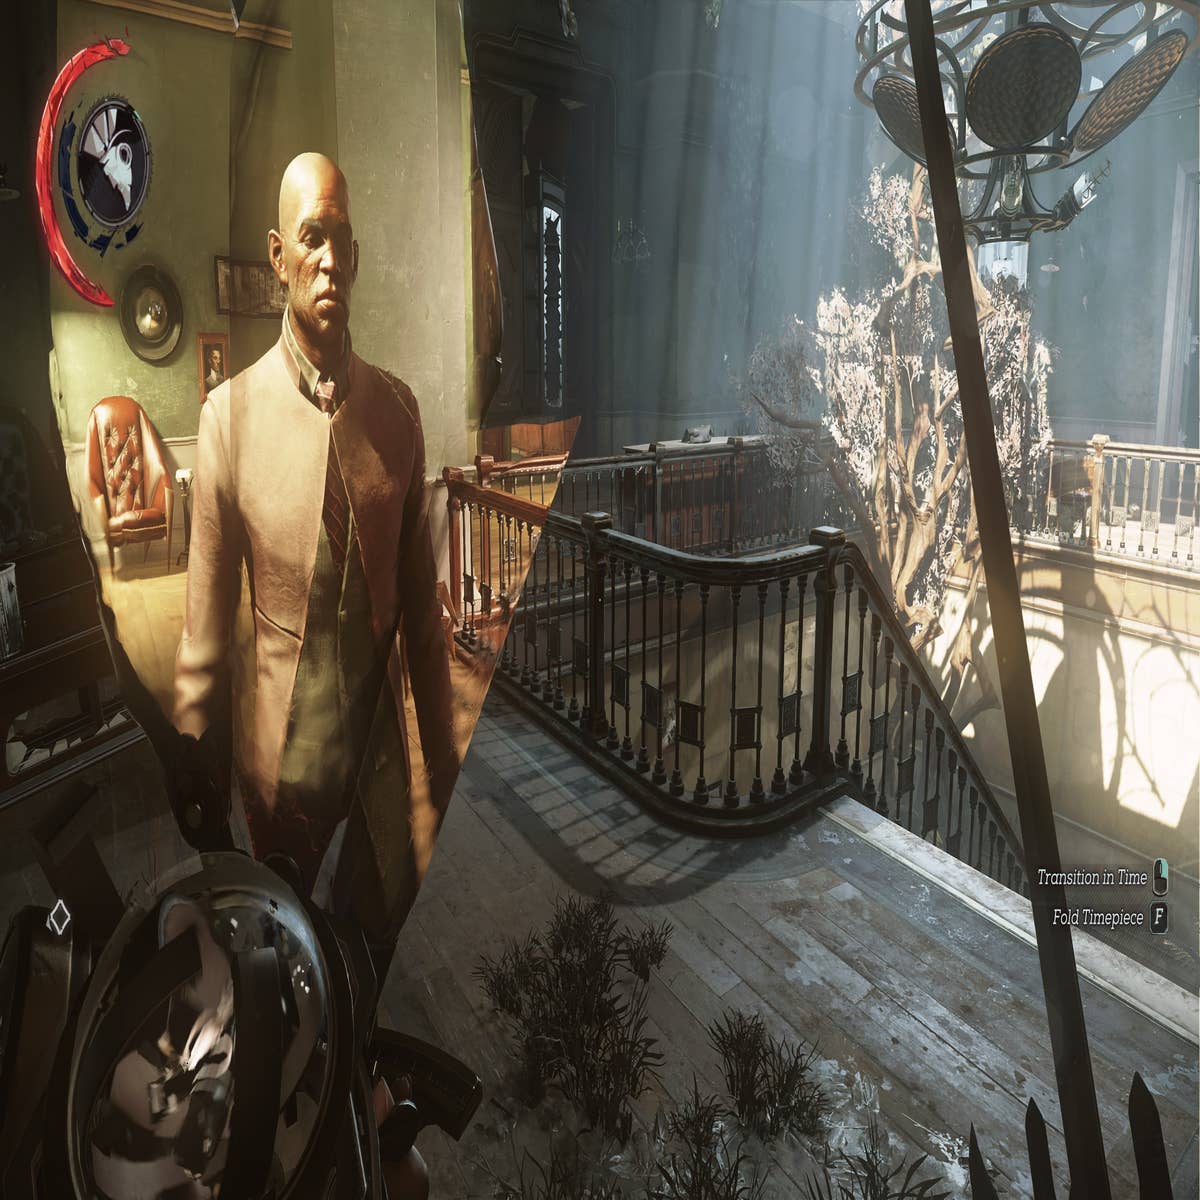 Dishonored 2 Review - GameSpot